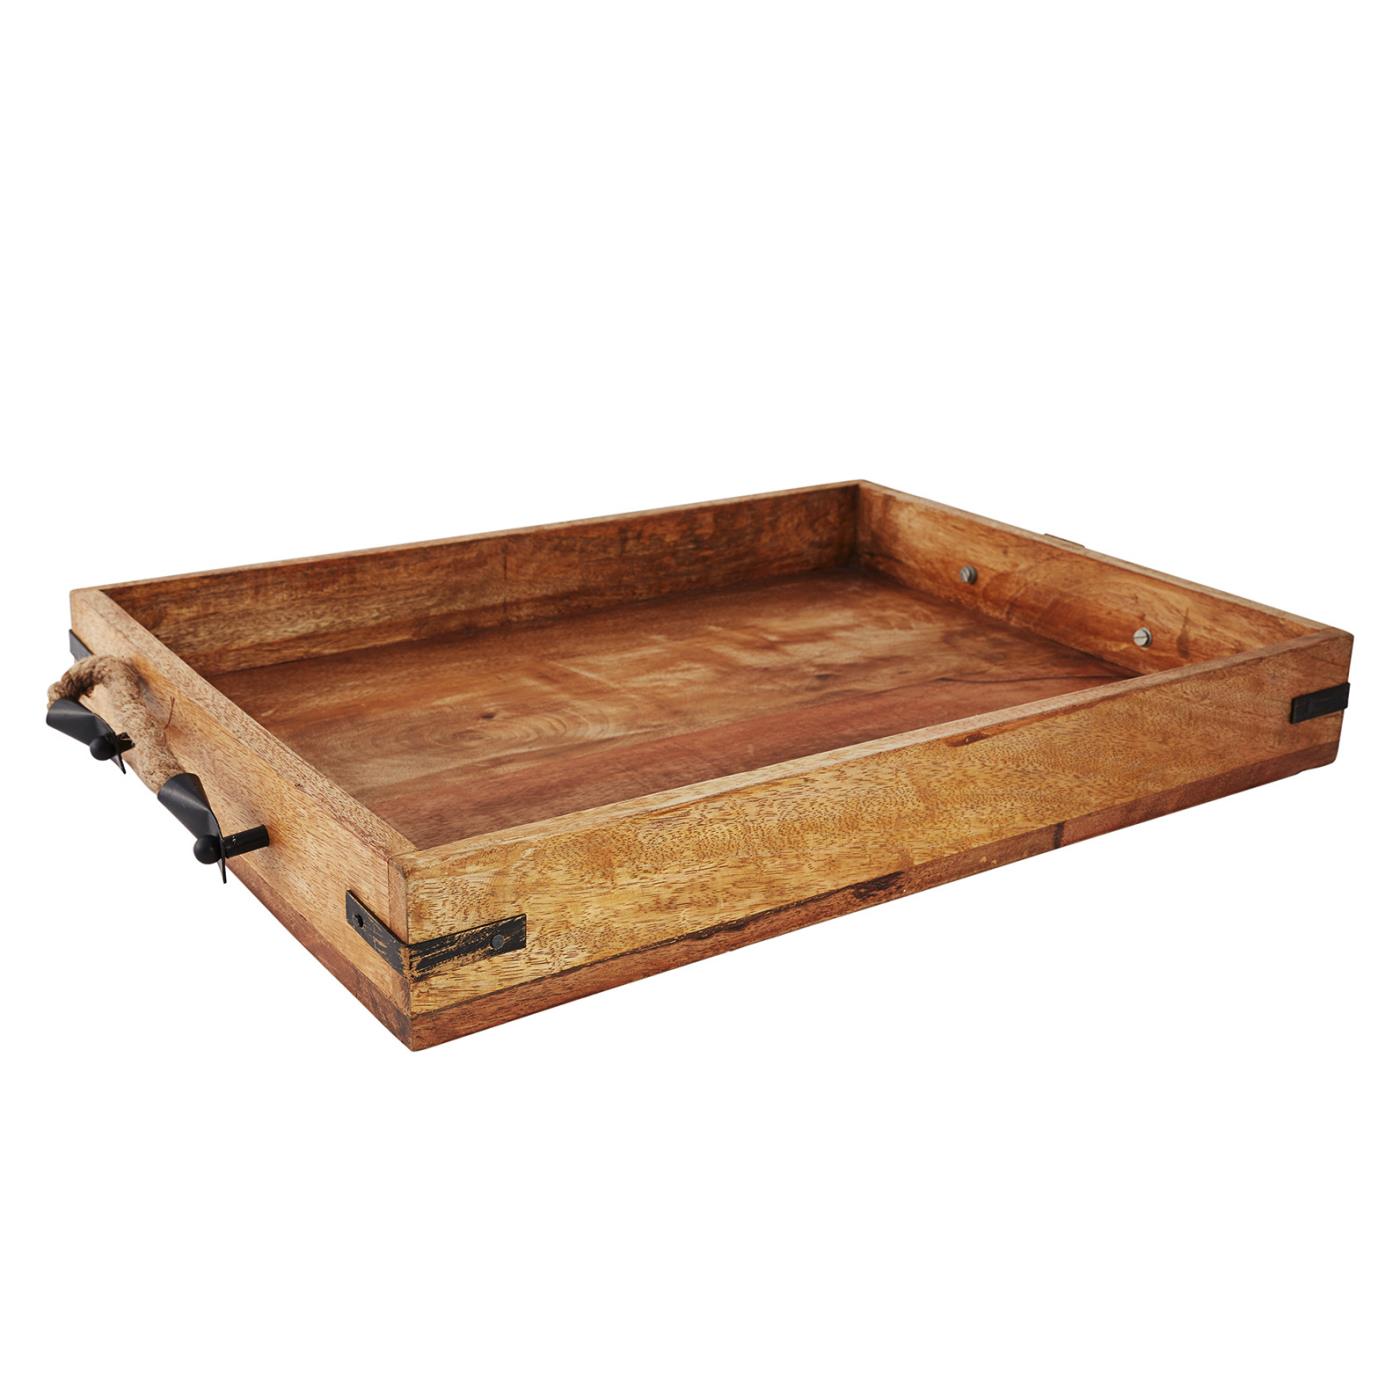 Wood Tray With Rope Handle - 15" x 20"